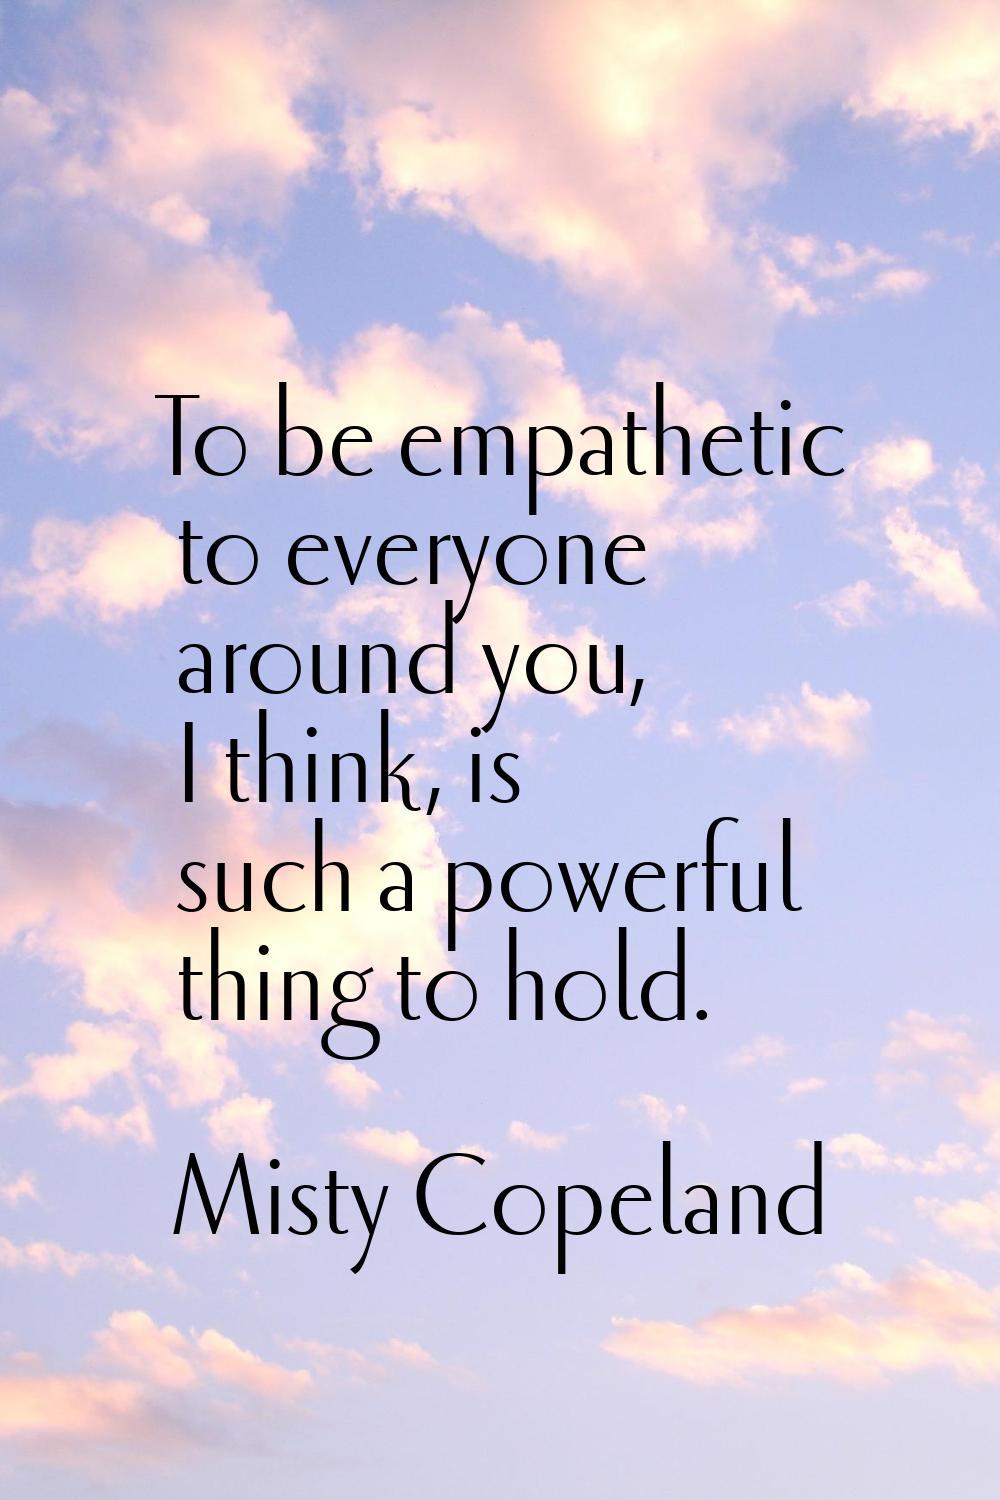 To be empathetic to everyone around you, I think, is such a powerful thing to hold.